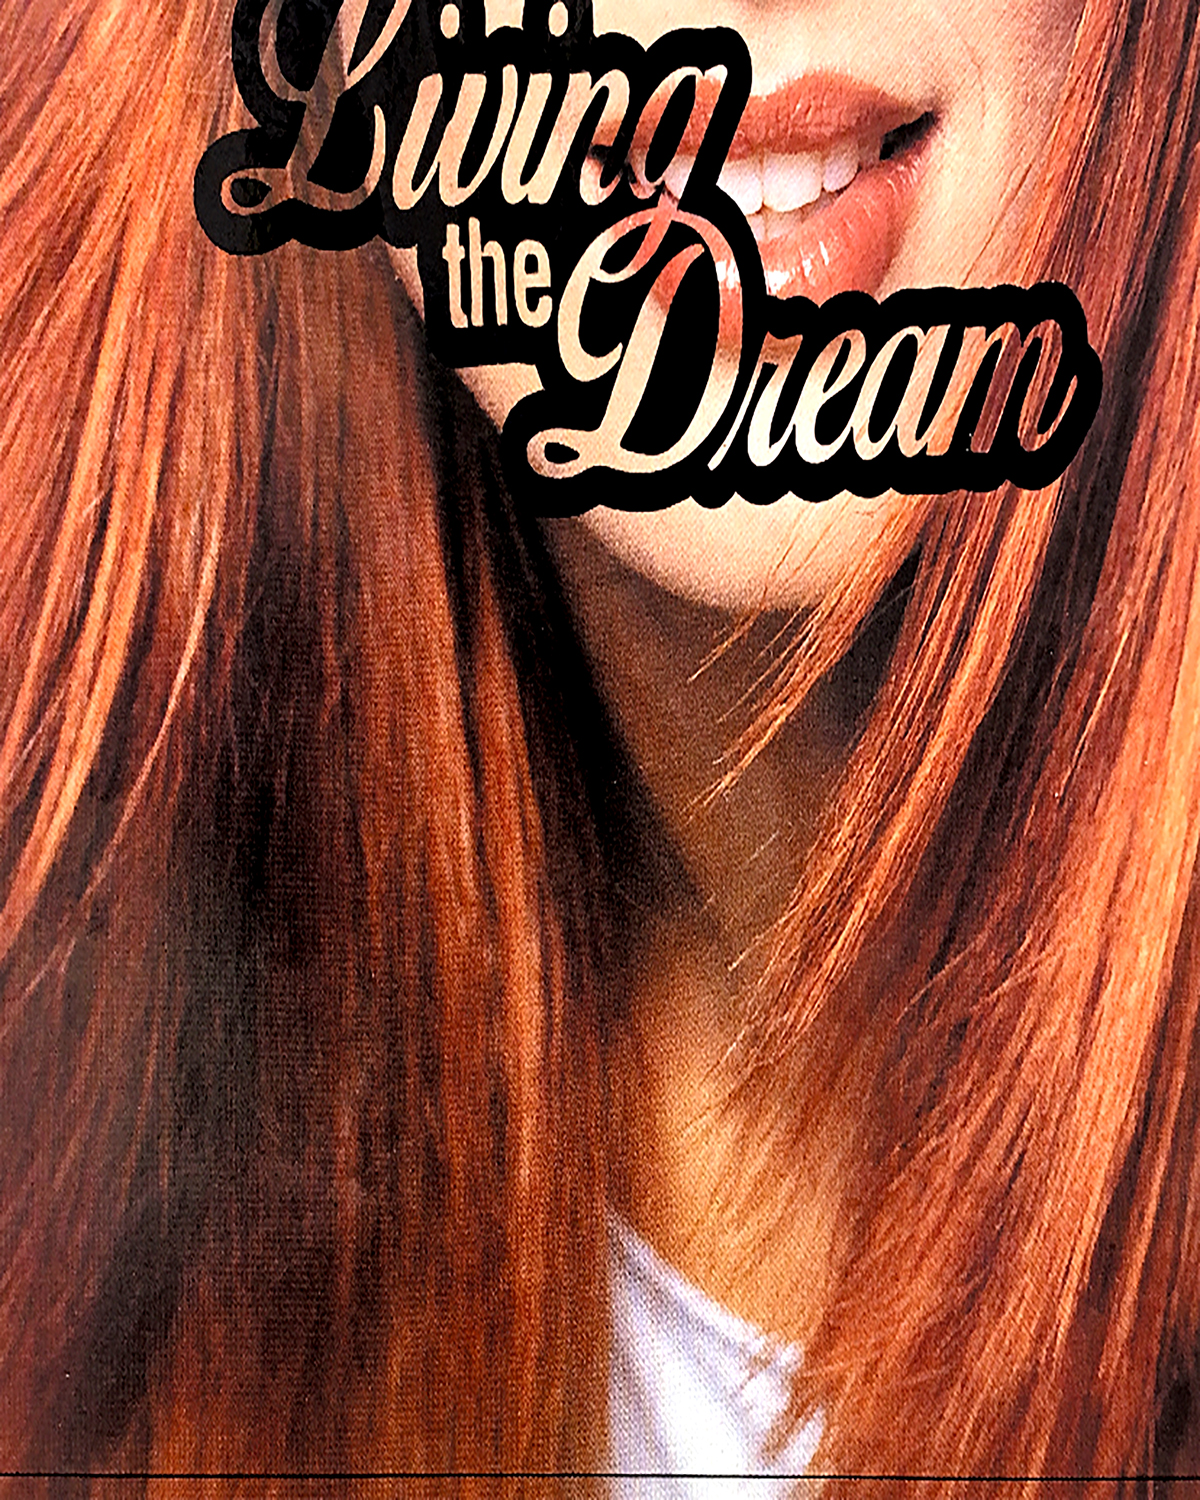 A close-up photo of a woman, with the phrase 'living the dream' written over her chin in black.